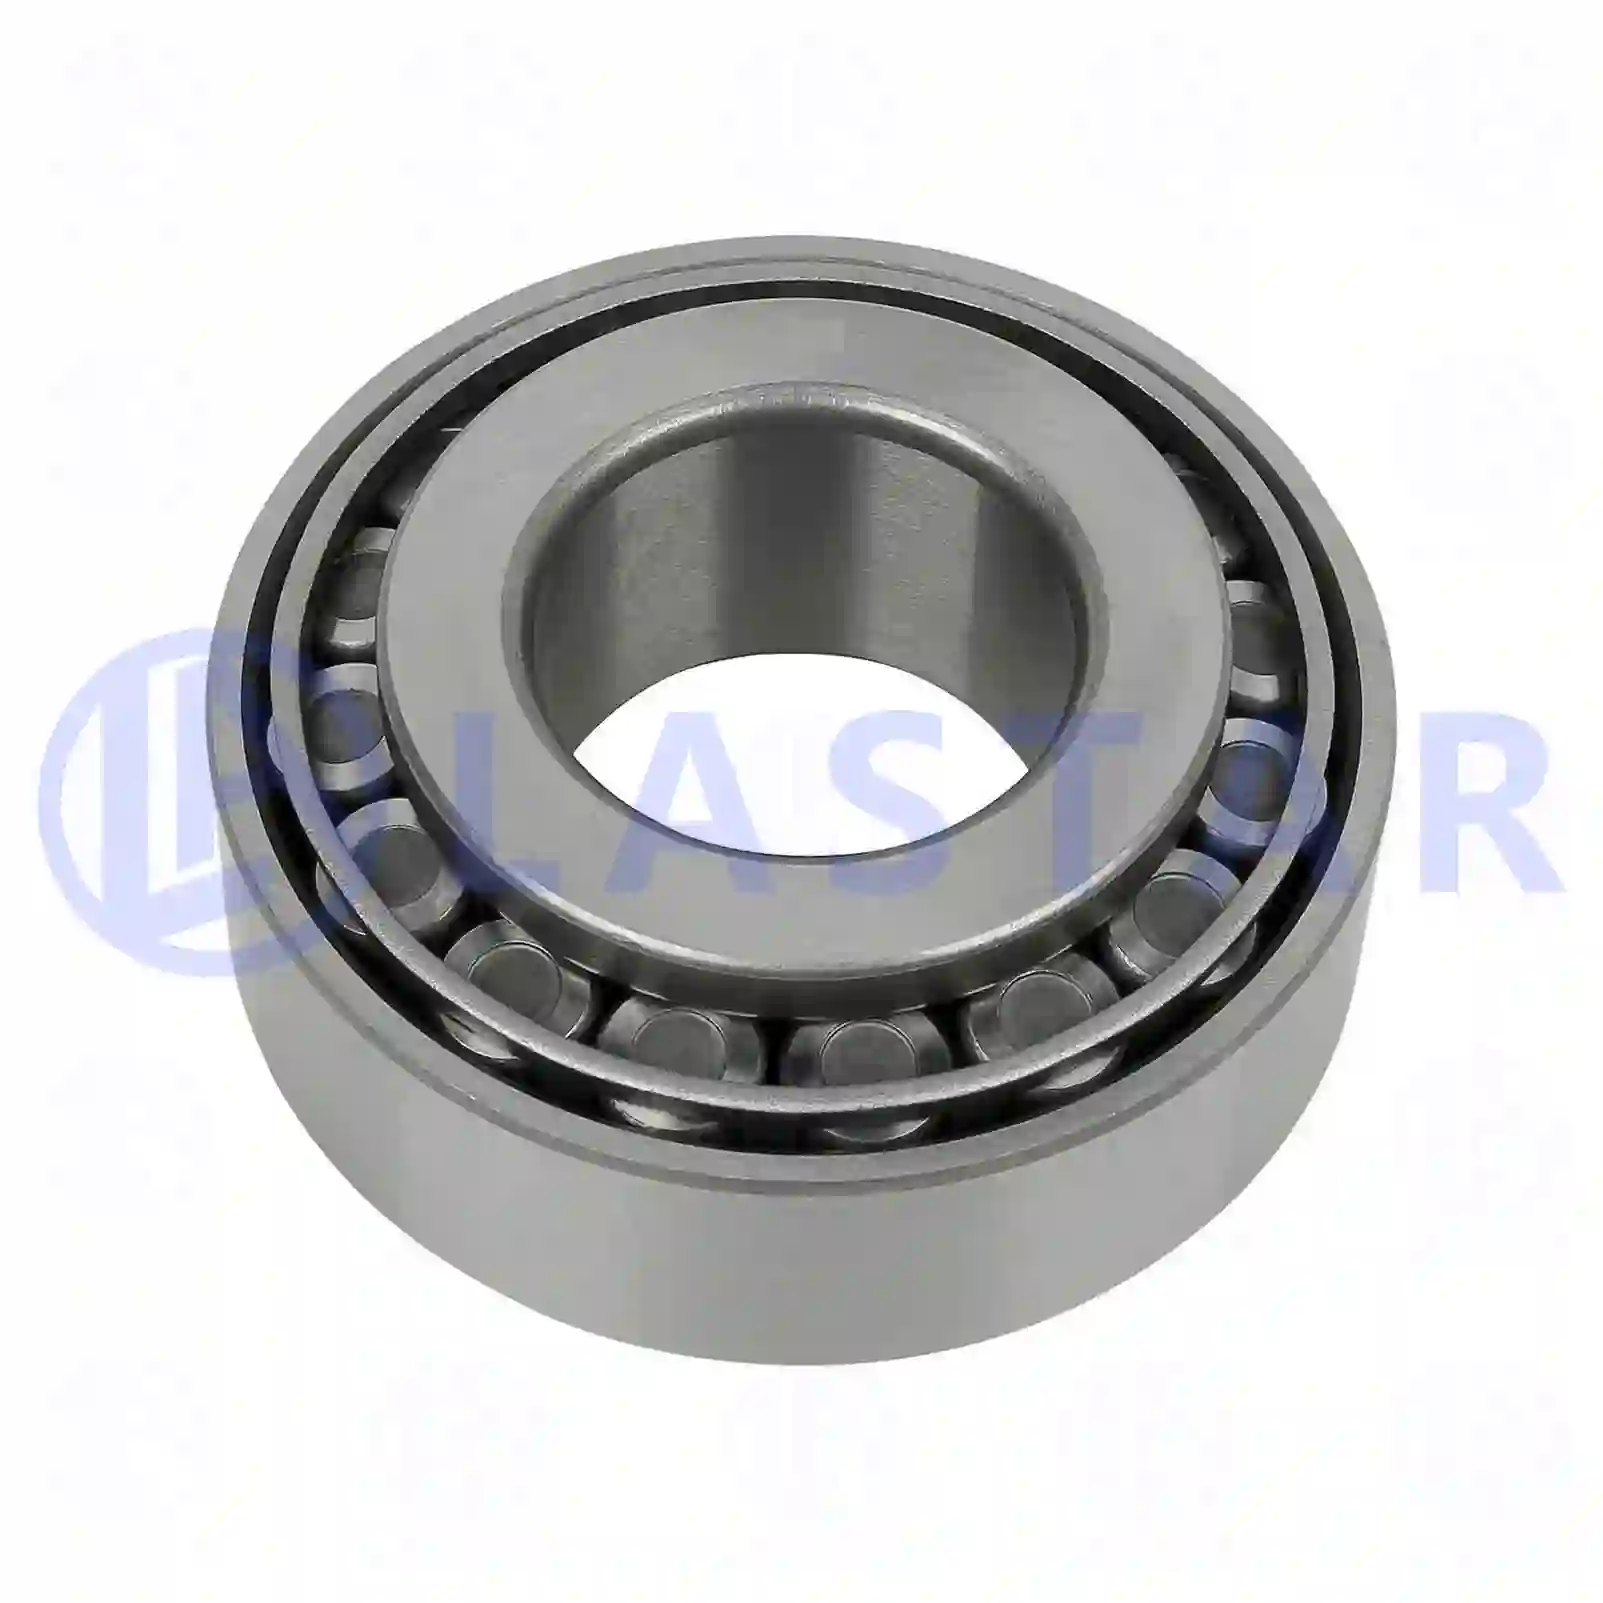 Tapered roller bearing, 77725196, 0264064500, 0140896, 0283684, 0283686, 140896, 283684, 283686, 0001442408X1, 000237070, 1442408, 1442408X1, 01110018, 01110019, 01110018, 01110019, 1110019, 26800590, 3612964500, 06324903100, 06324990013, 06324990133, 34934200003, 81934206051, 84934200023, A0023432848, A0857596000, 0049811305, MS556585, 0773230900, 0857596000, 0959532309, 3660704500, 4200003100, 1110018, 1362149, 14623, 397314, 6691168000, 11064, 1194652, ZG02977-0008 ||  77725196 Lastar Spare Part | Truck Spare Parts, Auotomotive Spare Parts Tapered roller bearing, 77725196, 0264064500, 0140896, 0283684, 0283686, 140896, 283684, 283686, 0001442408X1, 000237070, 1442408, 1442408X1, 01110018, 01110019, 01110018, 01110019, 1110019, 26800590, 3612964500, 06324903100, 06324990013, 06324990133, 34934200003, 81934206051, 84934200023, A0023432848, A0857596000, 0049811305, MS556585, 0773230900, 0857596000, 0959532309, 3660704500, 4200003100, 1110018, 1362149, 14623, 397314, 6691168000, 11064, 1194652, ZG02977-0008 ||  77725196 Lastar Spare Part | Truck Spare Parts, Auotomotive Spare Parts